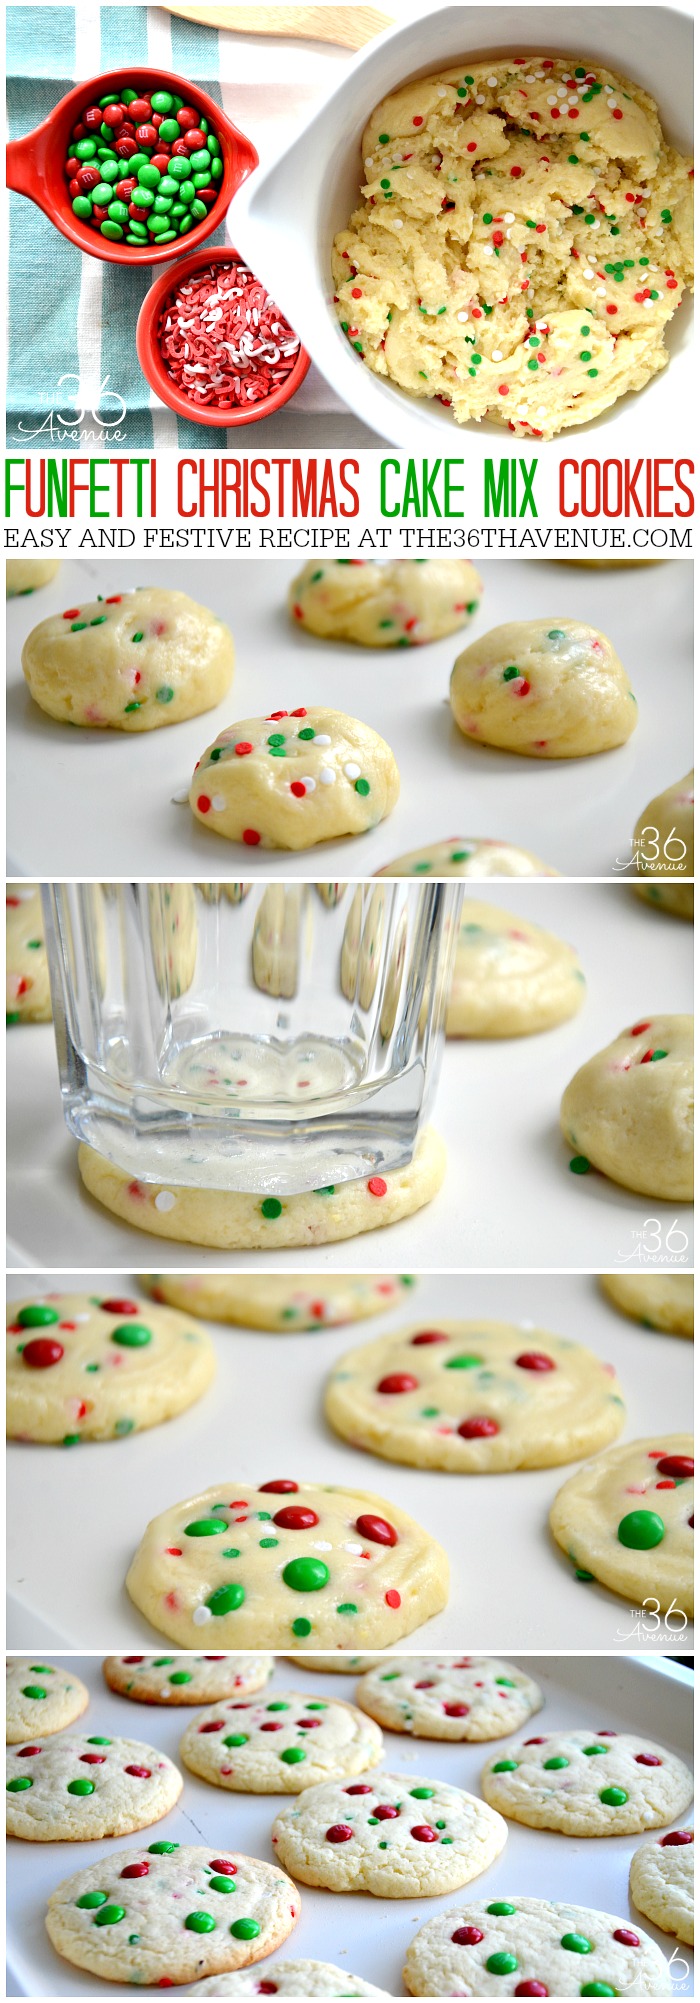 Christmas Cookies – Funfetti Cookies   The 20th AVENUE